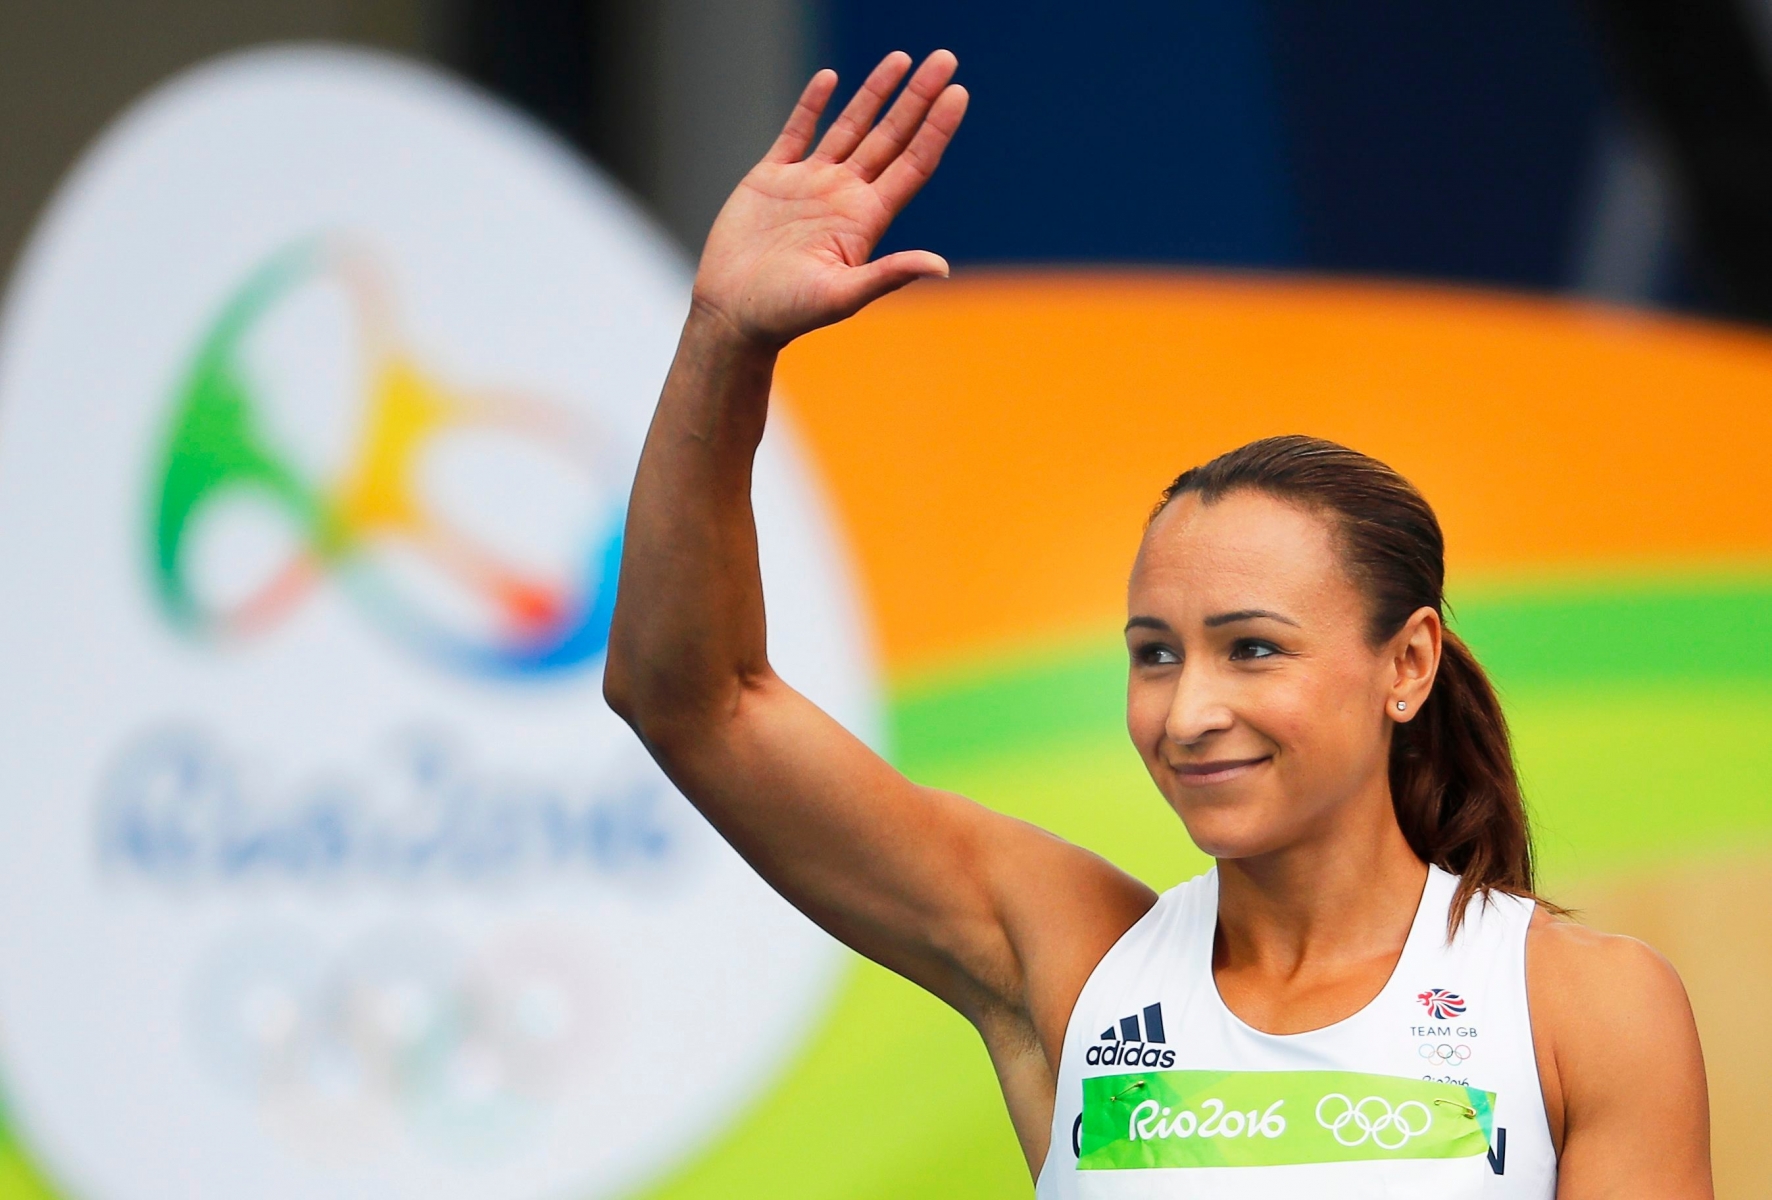 epa05583381 (FILE) A file picture dated 12 August 2016 of Britain's Jessica Ennis-Hill greeting the crowd during the 100m Hurdles heats of the women's Heptathlon competition of the Rio 2016 Olympic Games Athletics, Track and Field events at the Olympic Stadium in Rio de Janeiro, Brazil. British heptathlete Jessica Ennis-Hill on 13 October 2016 announed her retirement from athletics in a statement in social media. The 30-year-old Ennis-Hill won the heptathlon gold medal at the London 2012 Olympics, silver at the Rio 2016 Olympics and two gold medals at the Athletics World Championships in 2009 and 2015.  EPA/DIEGO AZUBEL *** Local Caption *** 52950090 FILE BRAZIL ATHLETICS ENNIS-HILL